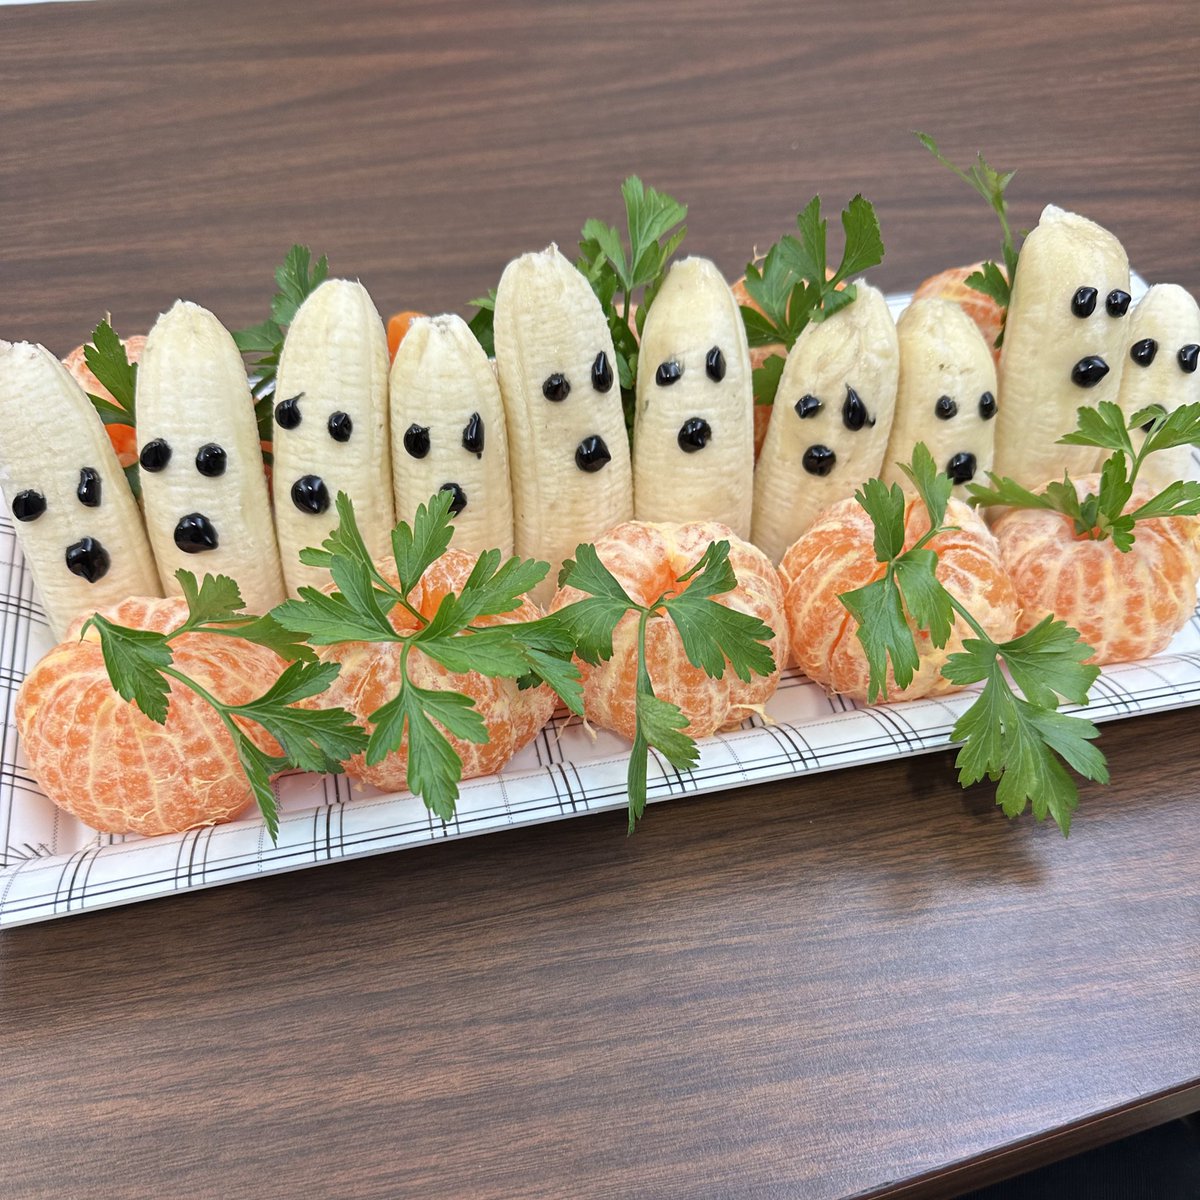 Being the only vegan in the office has my coworkers being creative 🧡🎃👻 #healthytreats